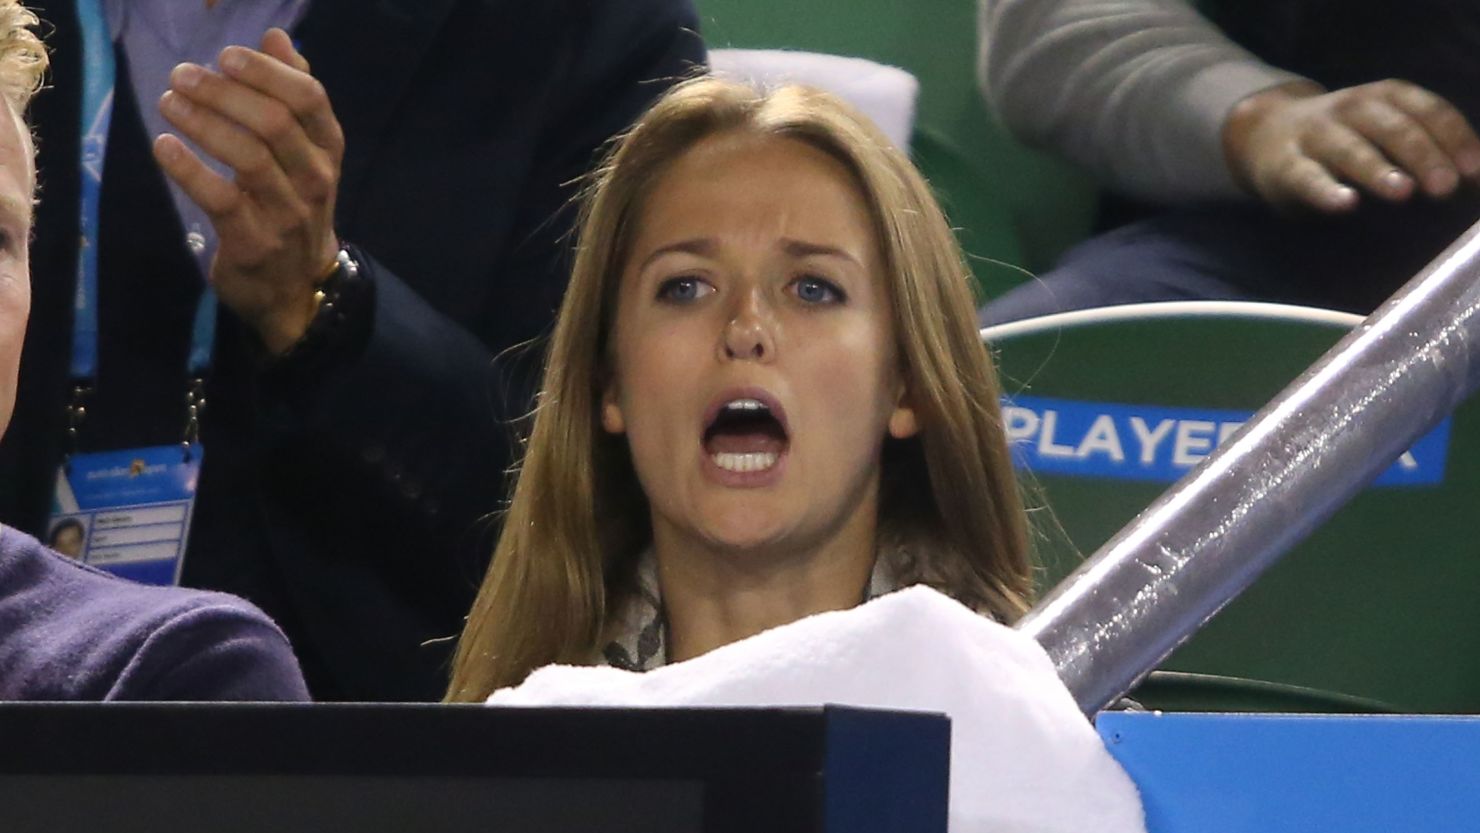 Kim Sears celebrates as her boyfriend Andy Murray wins his semifinal match against Tomas Berdych of the Czech Republic during day 11 of the 2015 Australian Open in Melbourne.